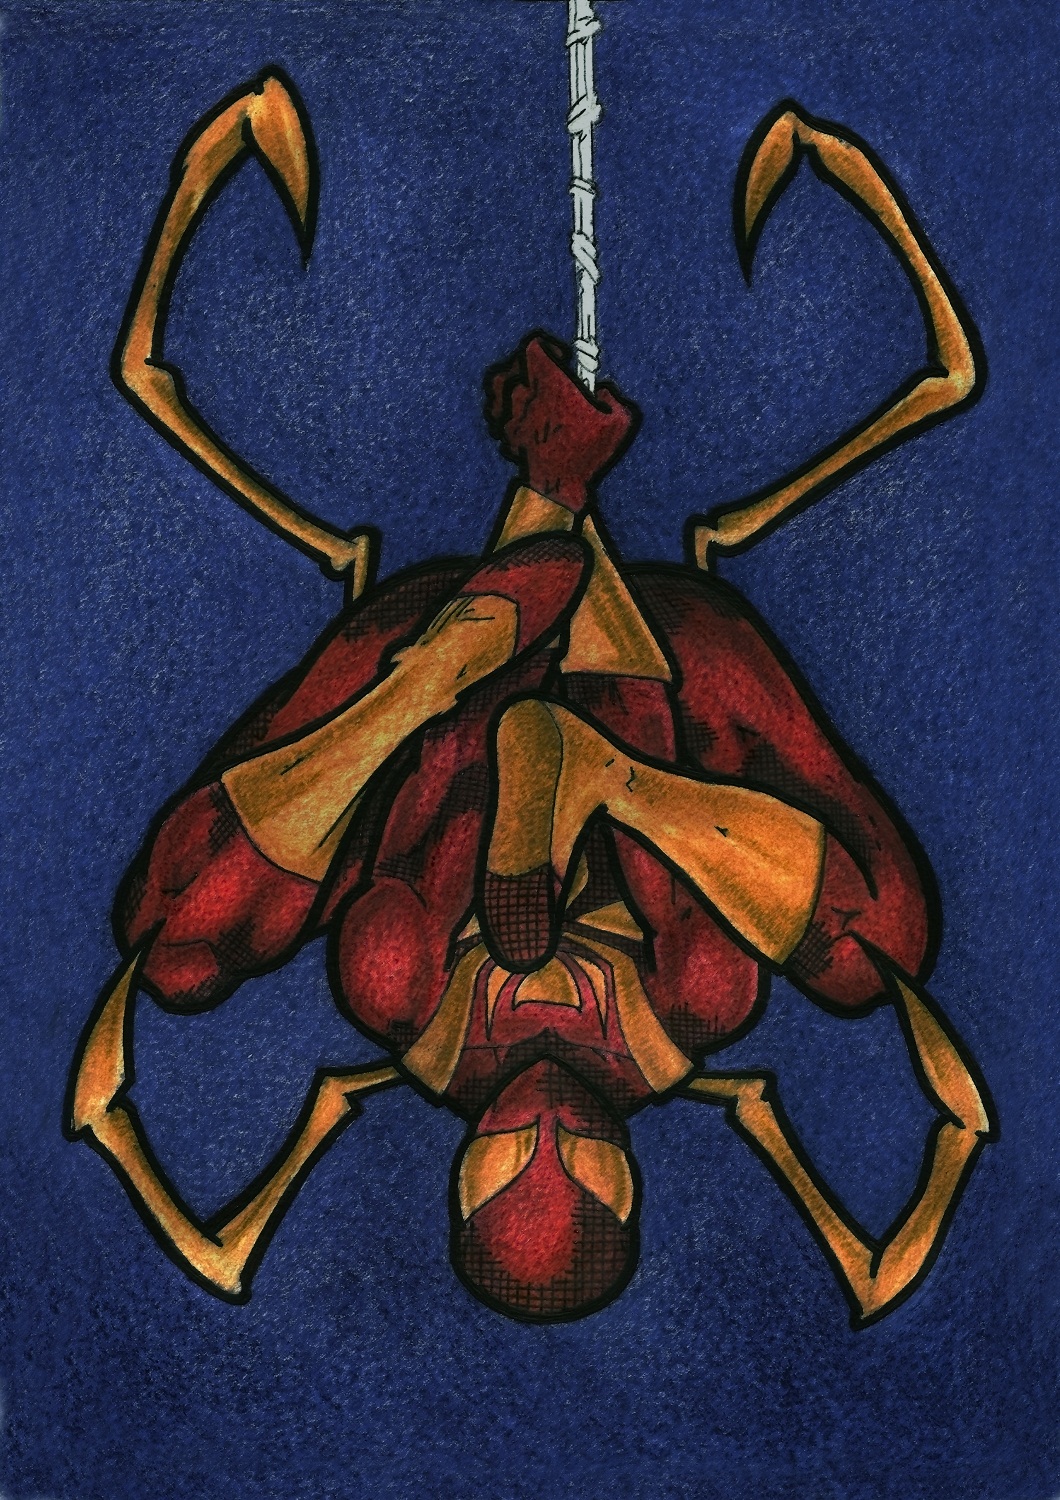 Iron Spider Wallpaper Iron Spider by Lucasgms